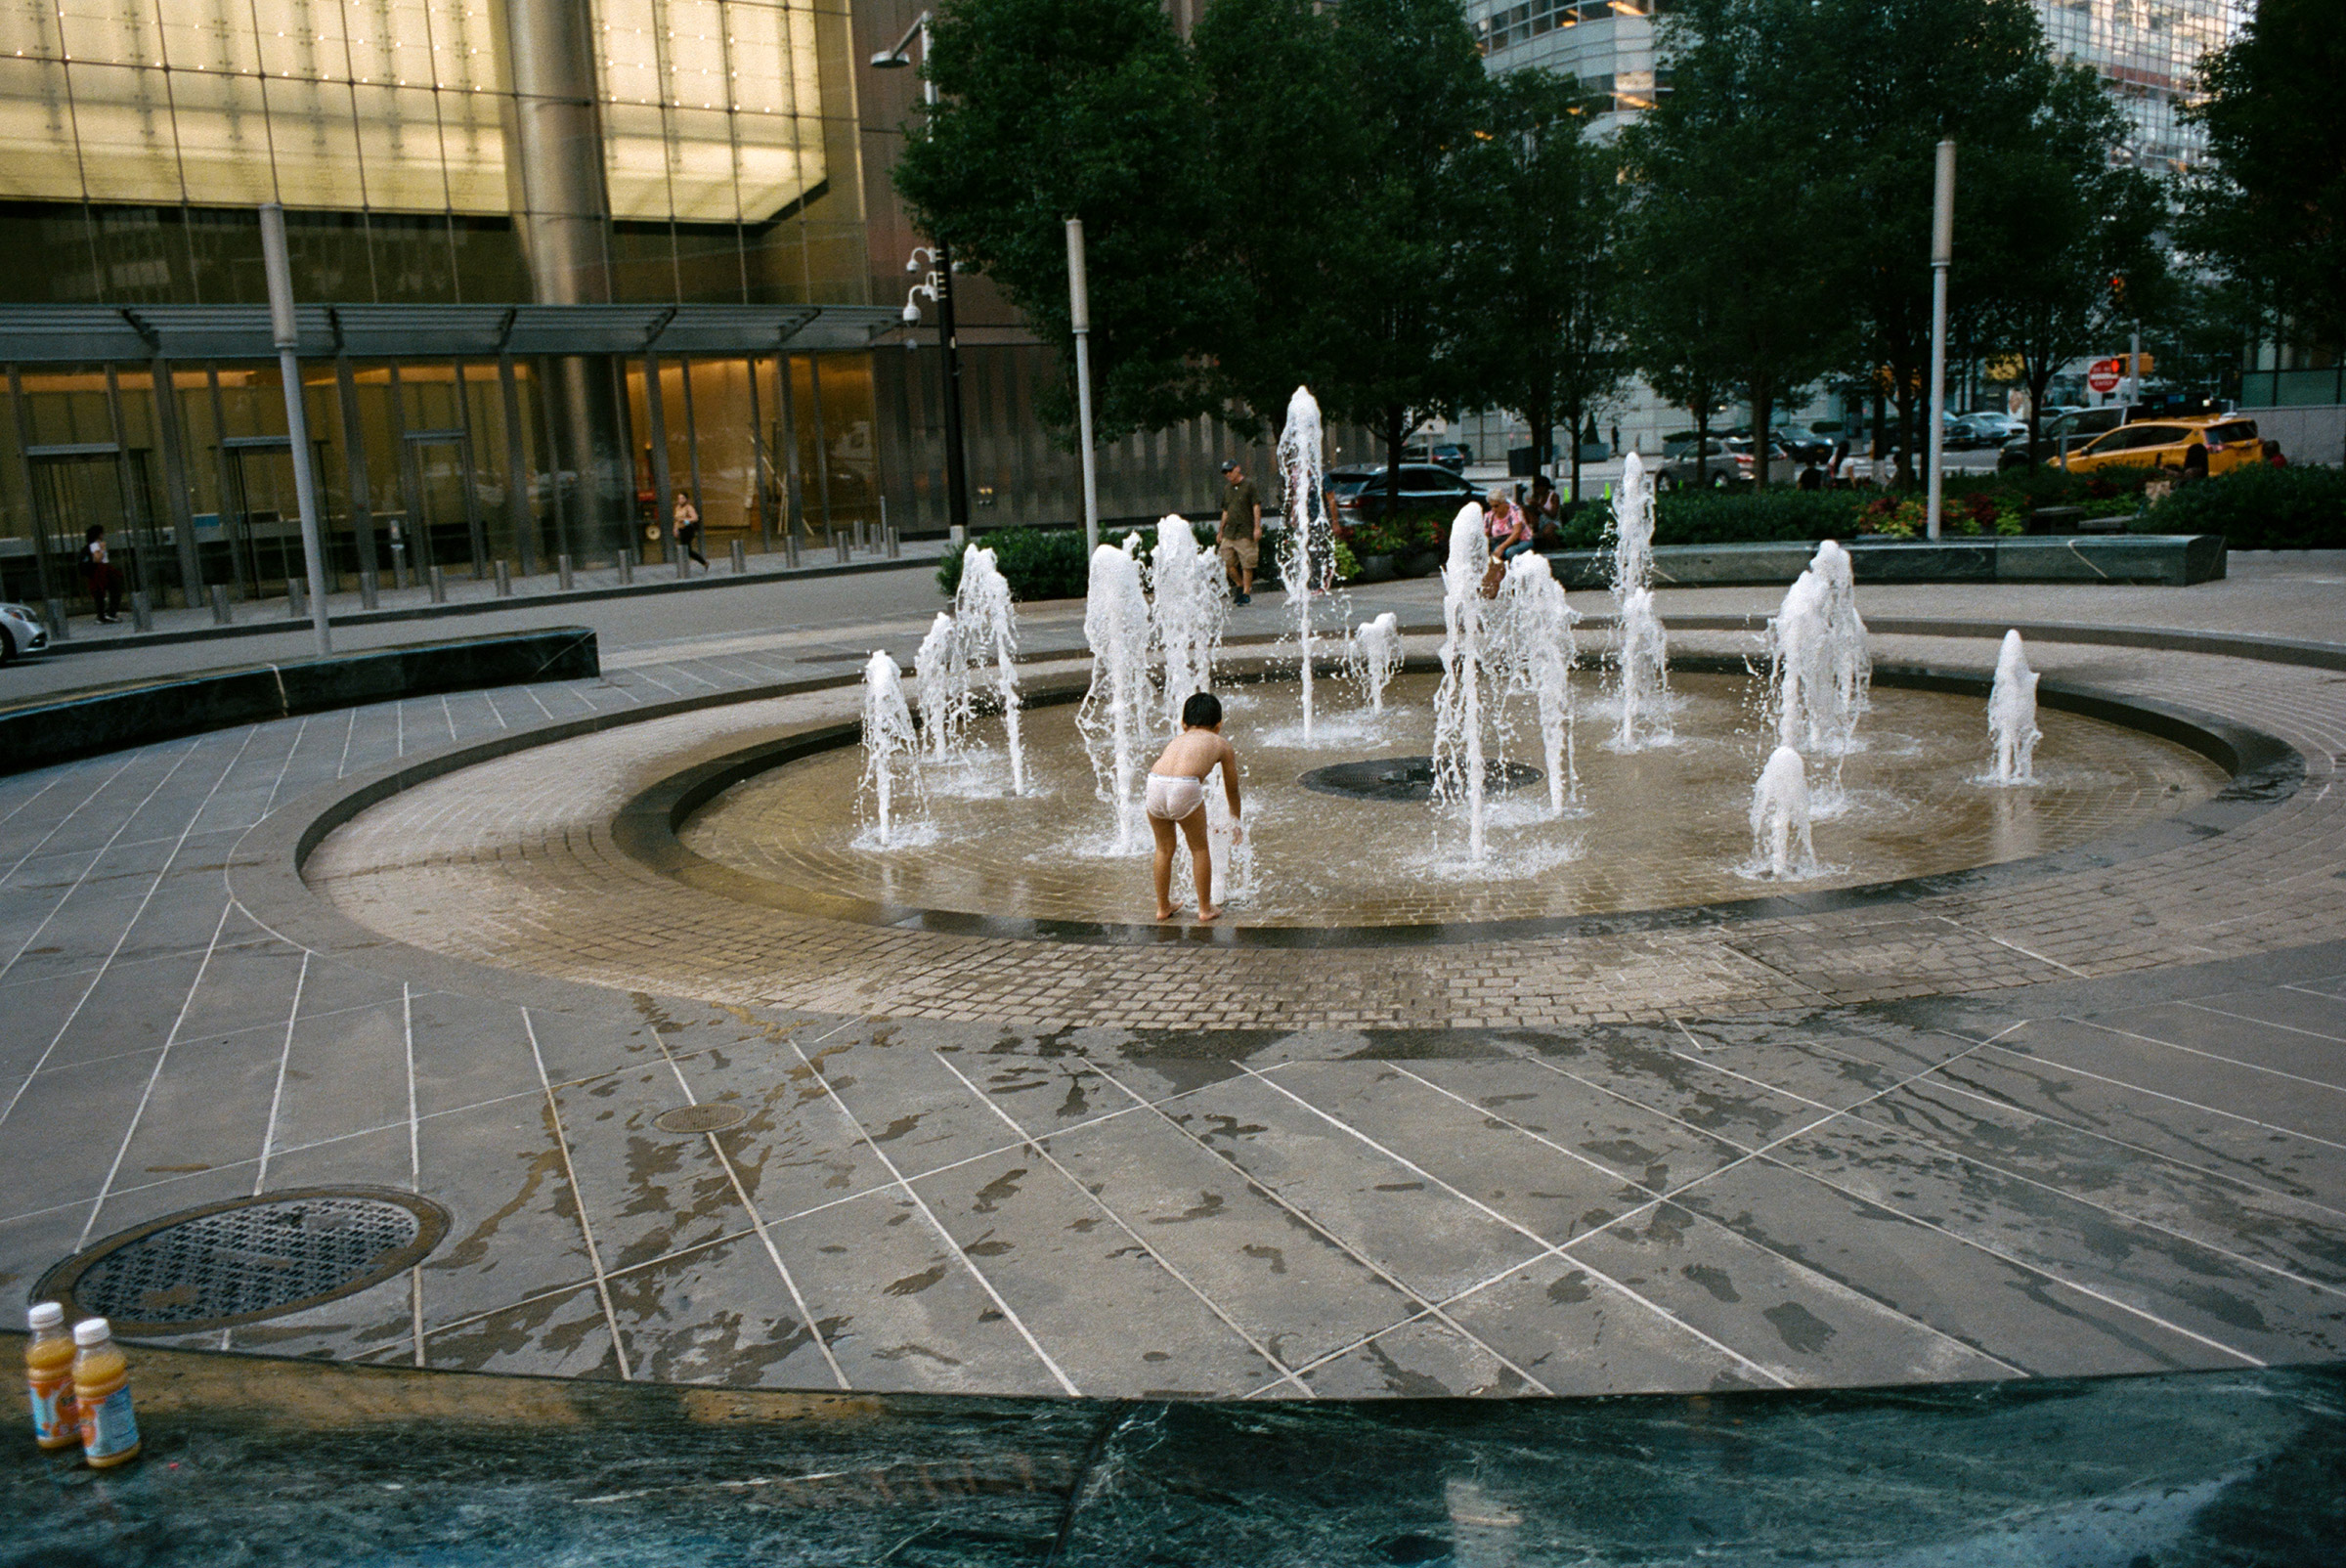 A child cools off in a fountain just north of the World Trade Center, Sept. 1, 2021.